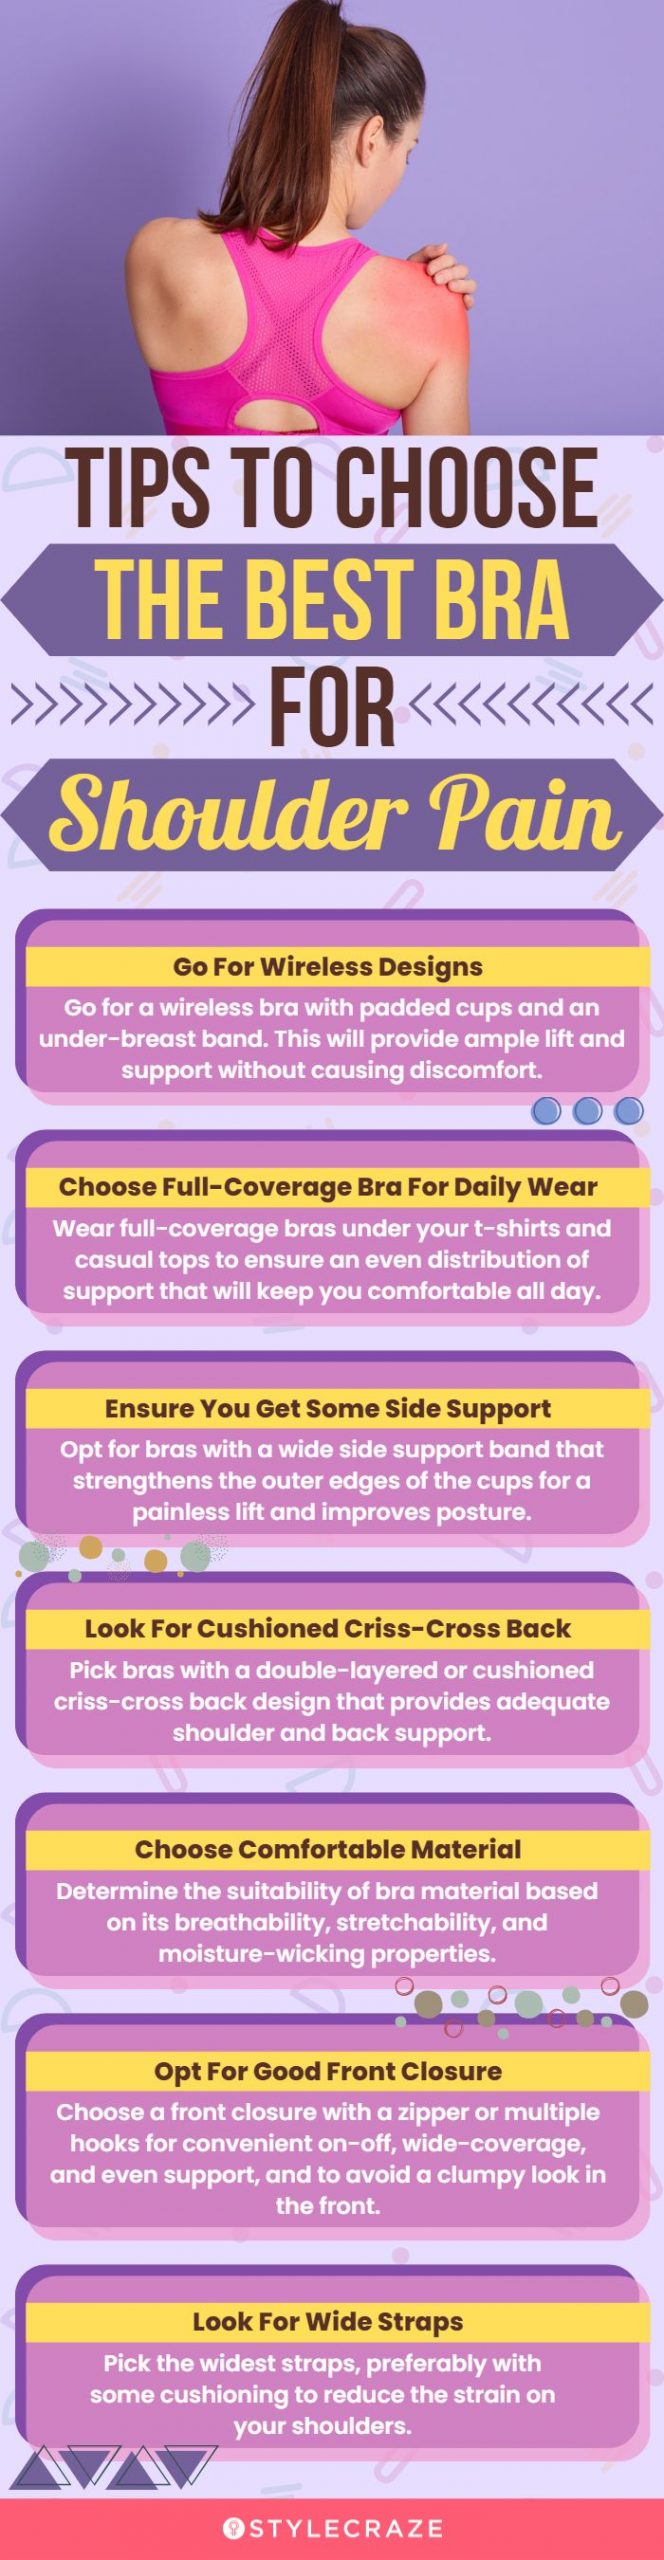 Tips To Choose The Best Bra For Shoulder Pain (infographic)